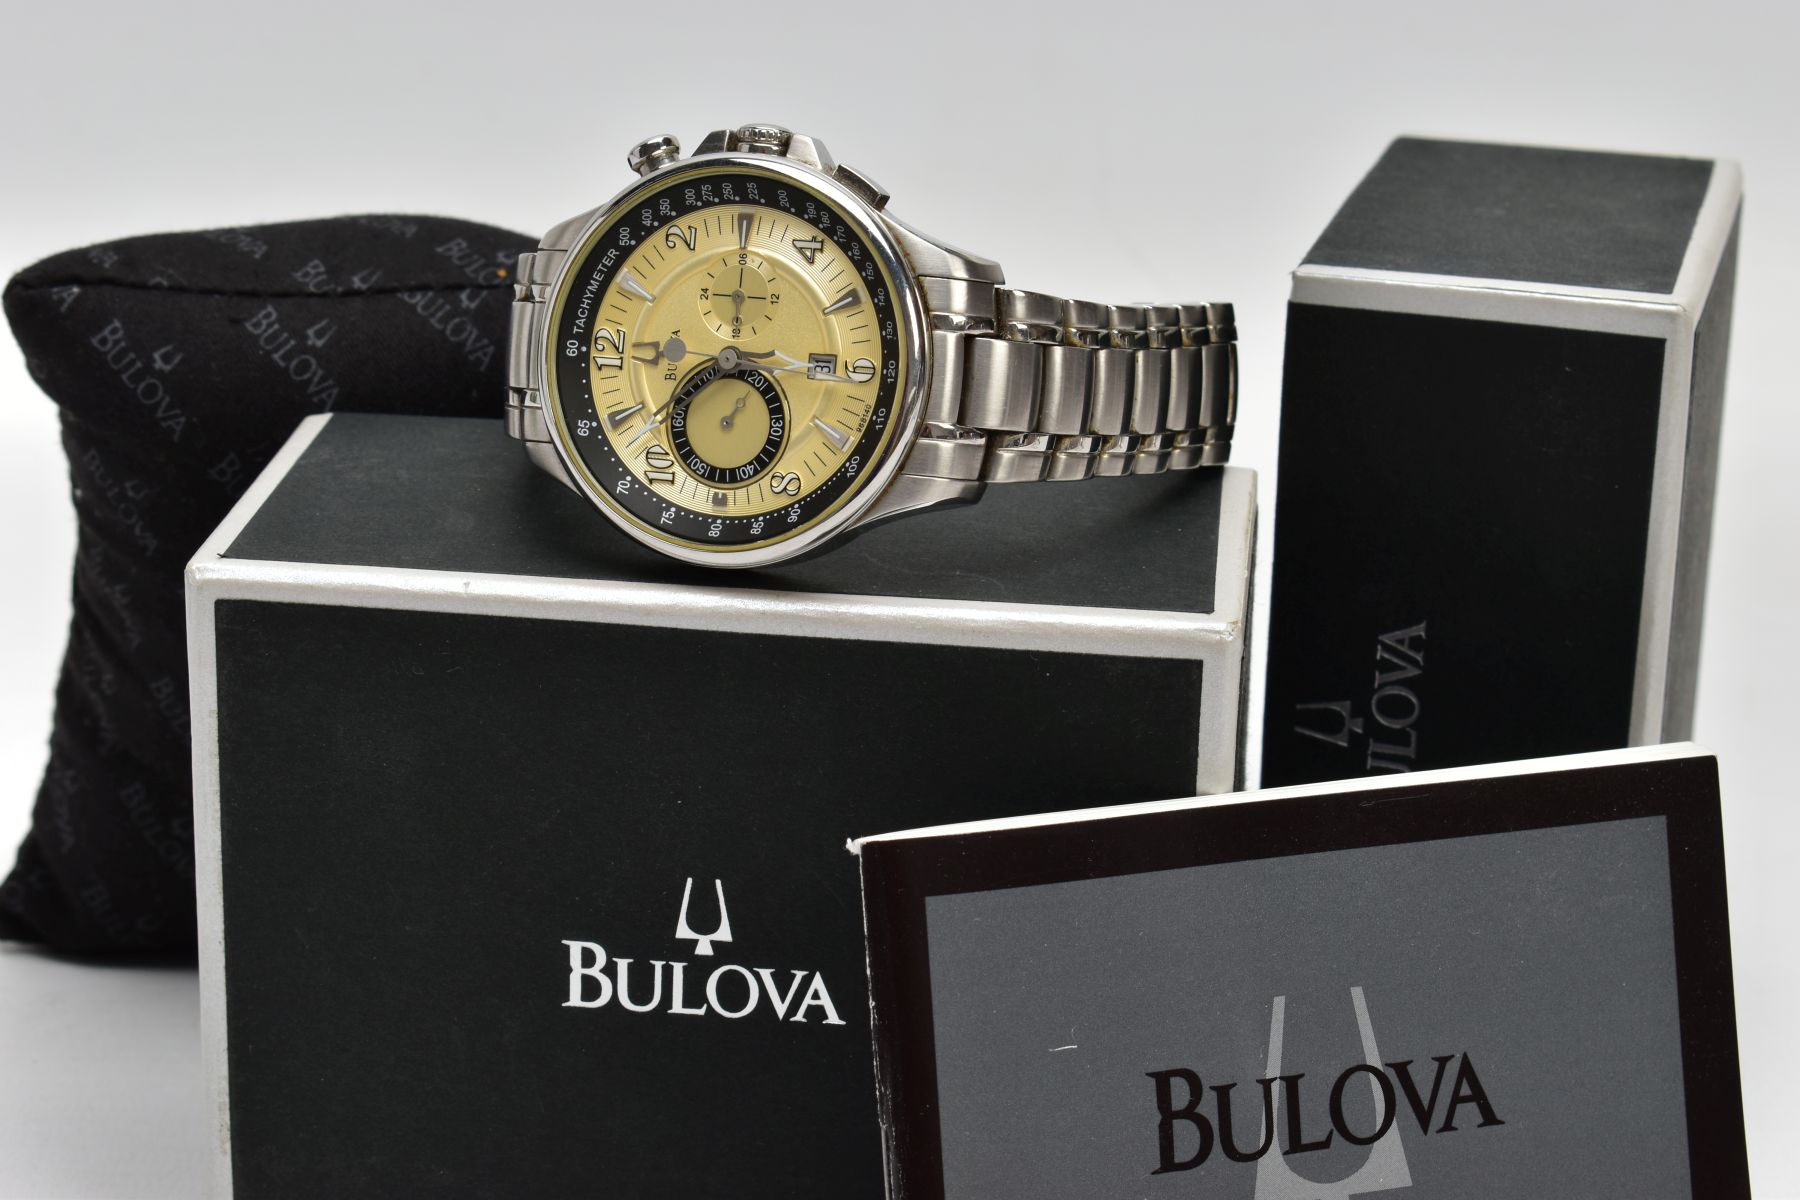 A GENTS 'BULOVA' CHRONOGRAPH WRISTWATCH, round gold dial signed 'Bulova', Arabic numerals and - Image 4 of 4